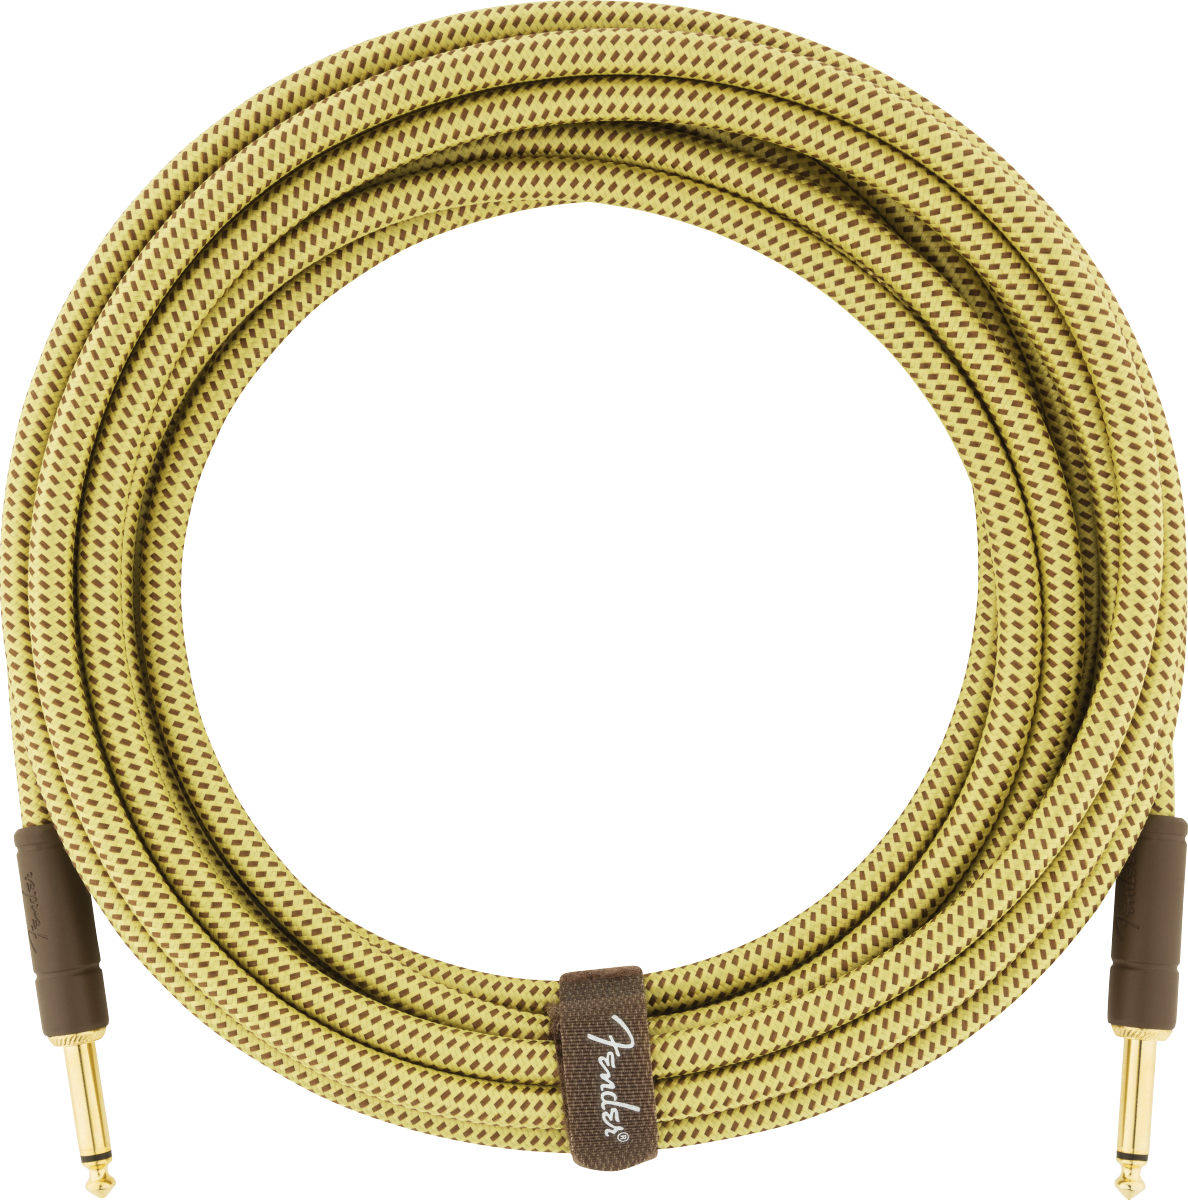 FENDER DELUXE INSTRUMENT CABLE 18.6FT - STRAIGHT TO STRAIGHT TWEED